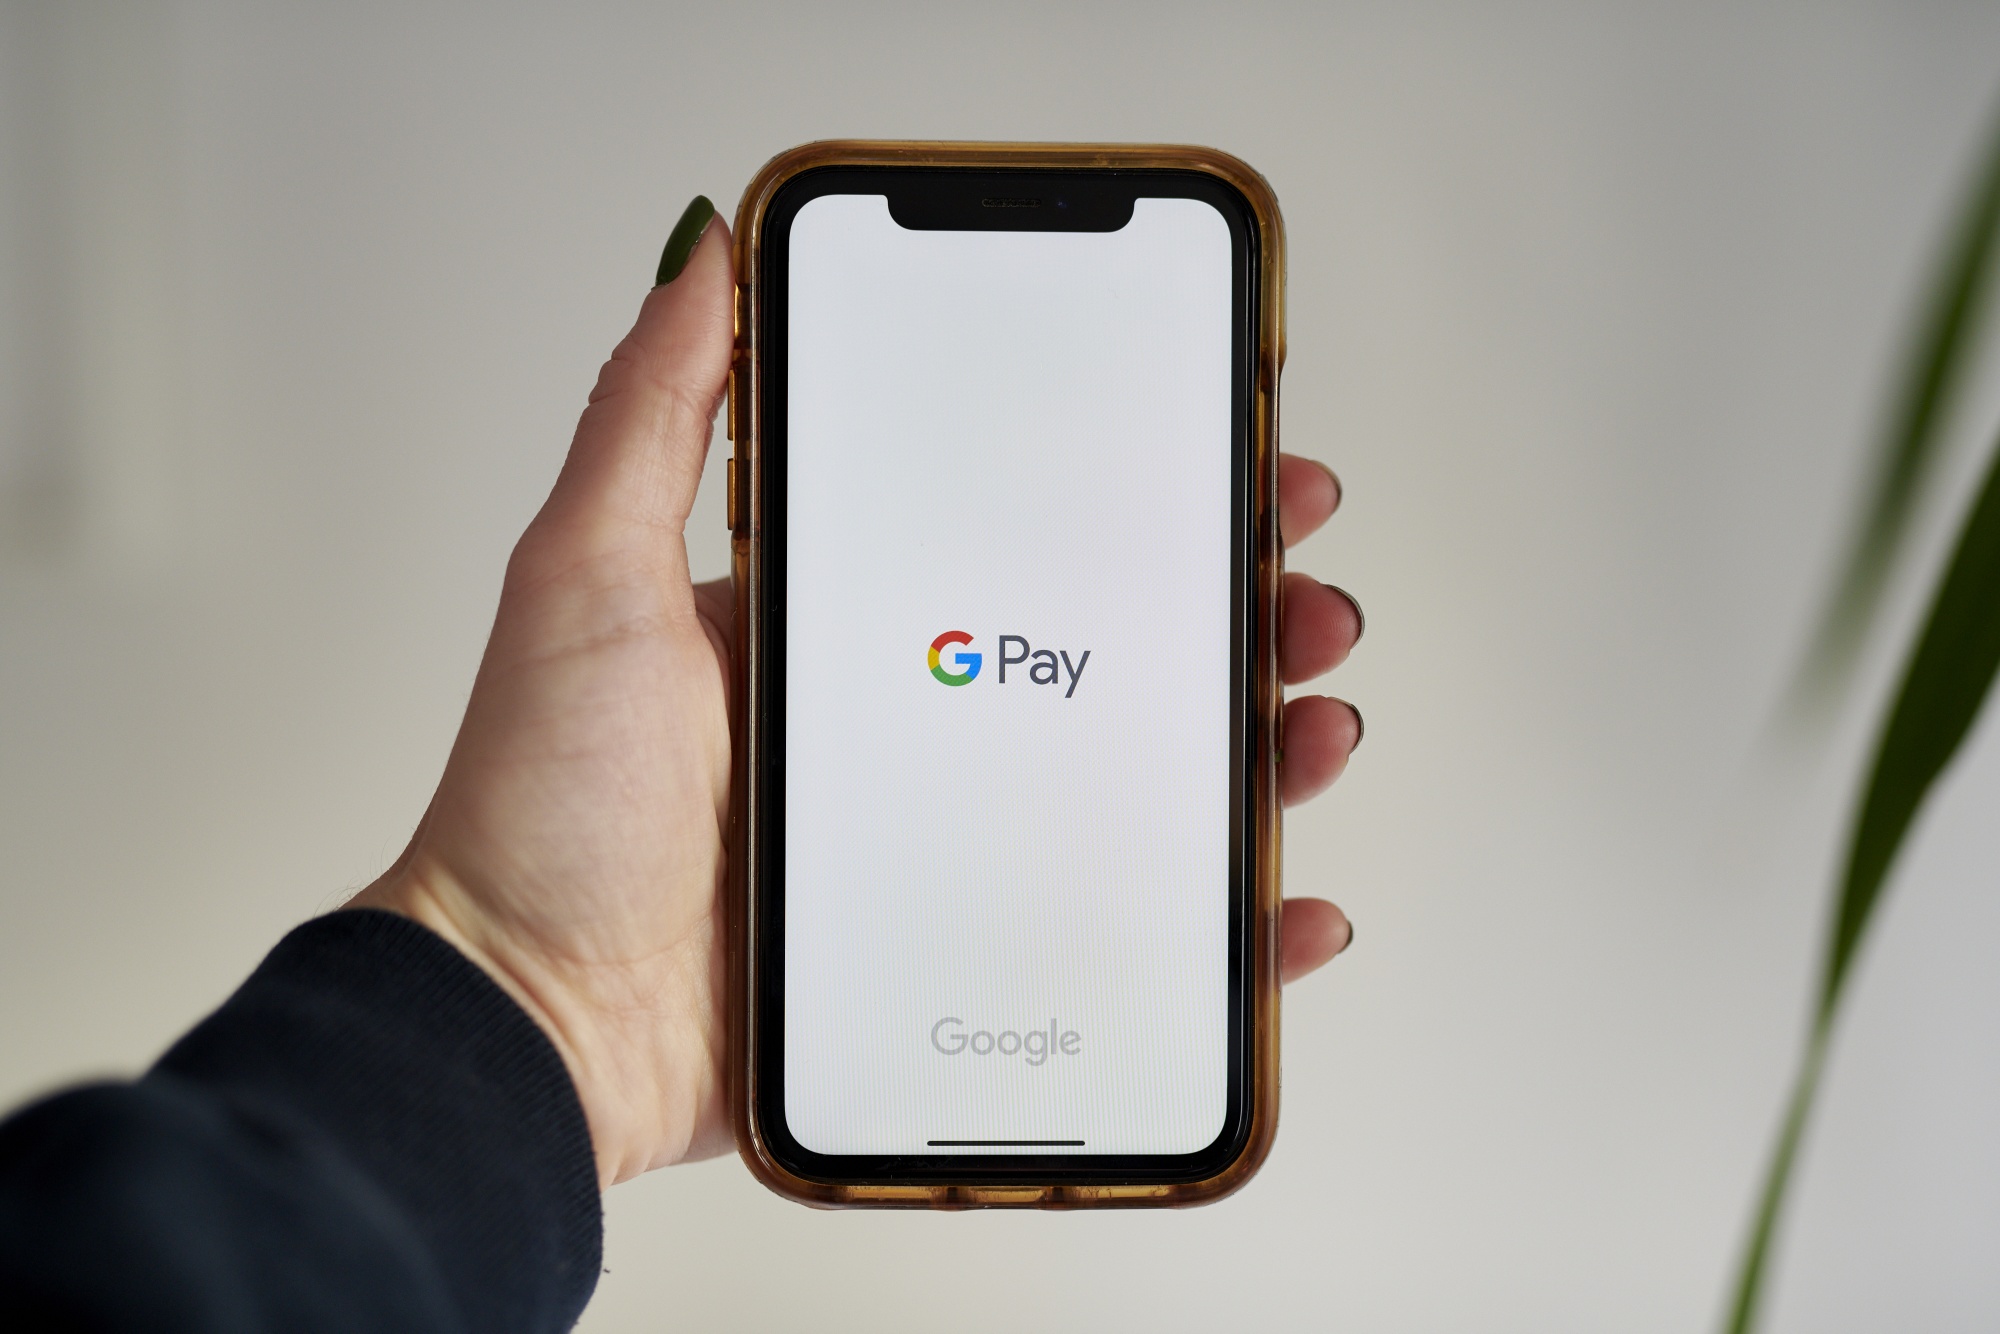 Google To Offer Checking Accounts With Banks In Pay App Revamp